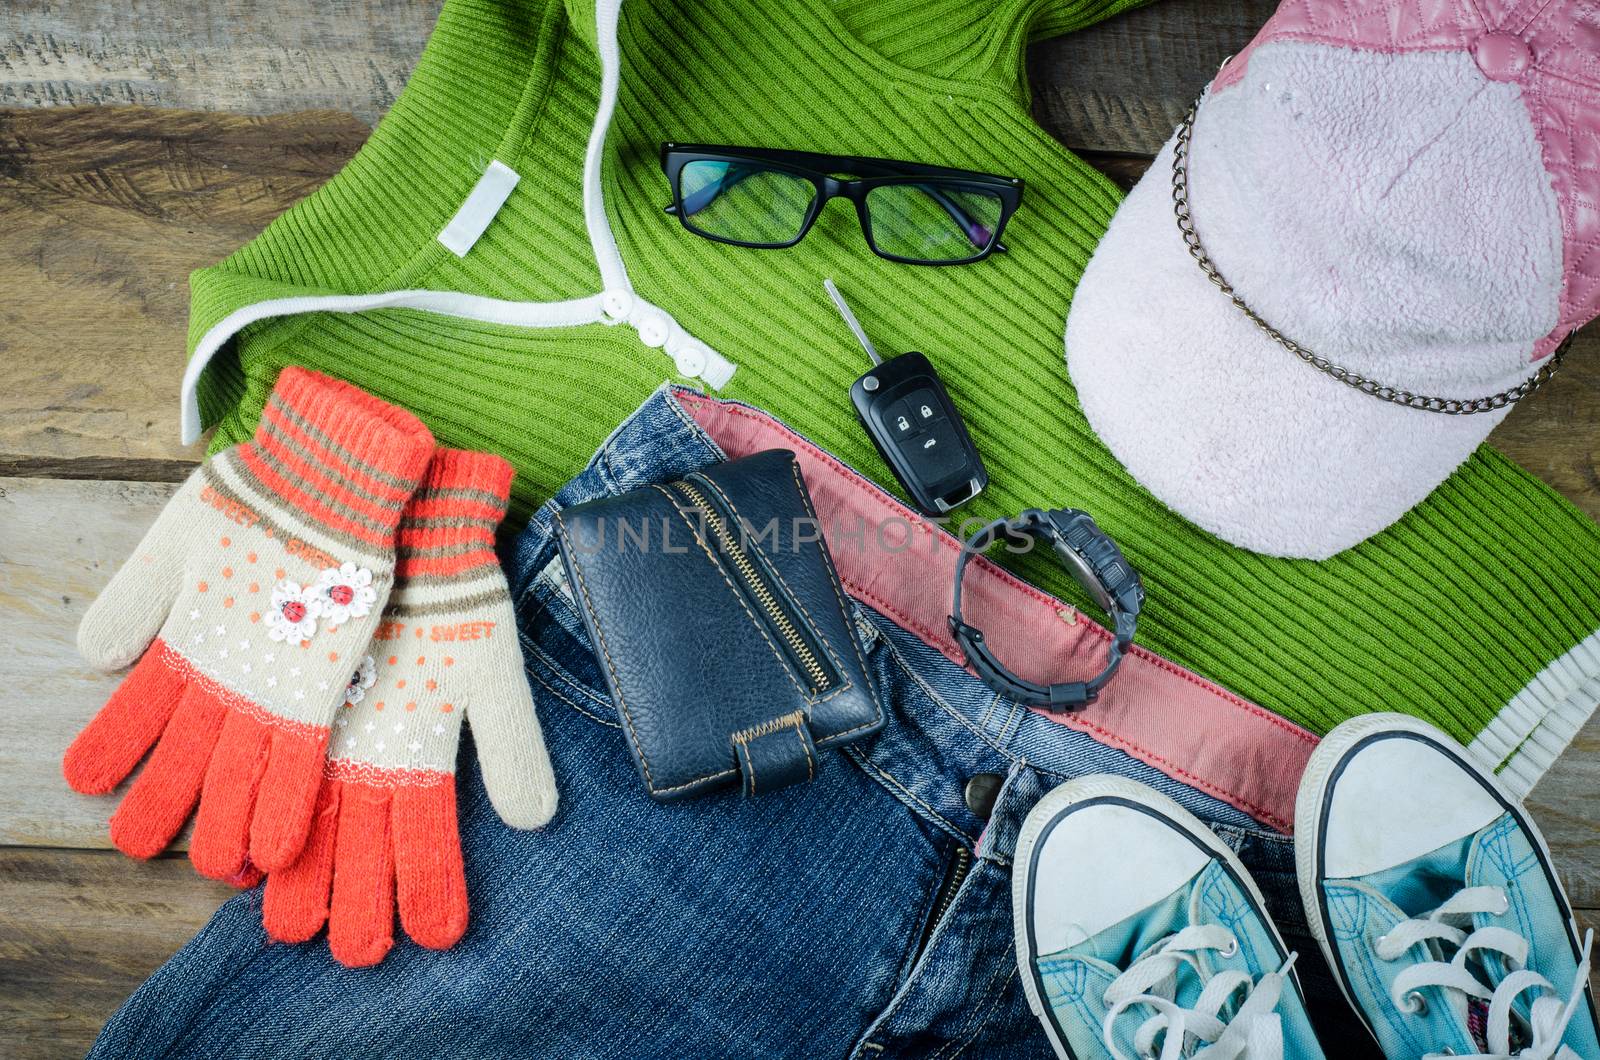 Travel accessories, clothes Wallet, glasses, phone headset, shoes hat, Ready for travel